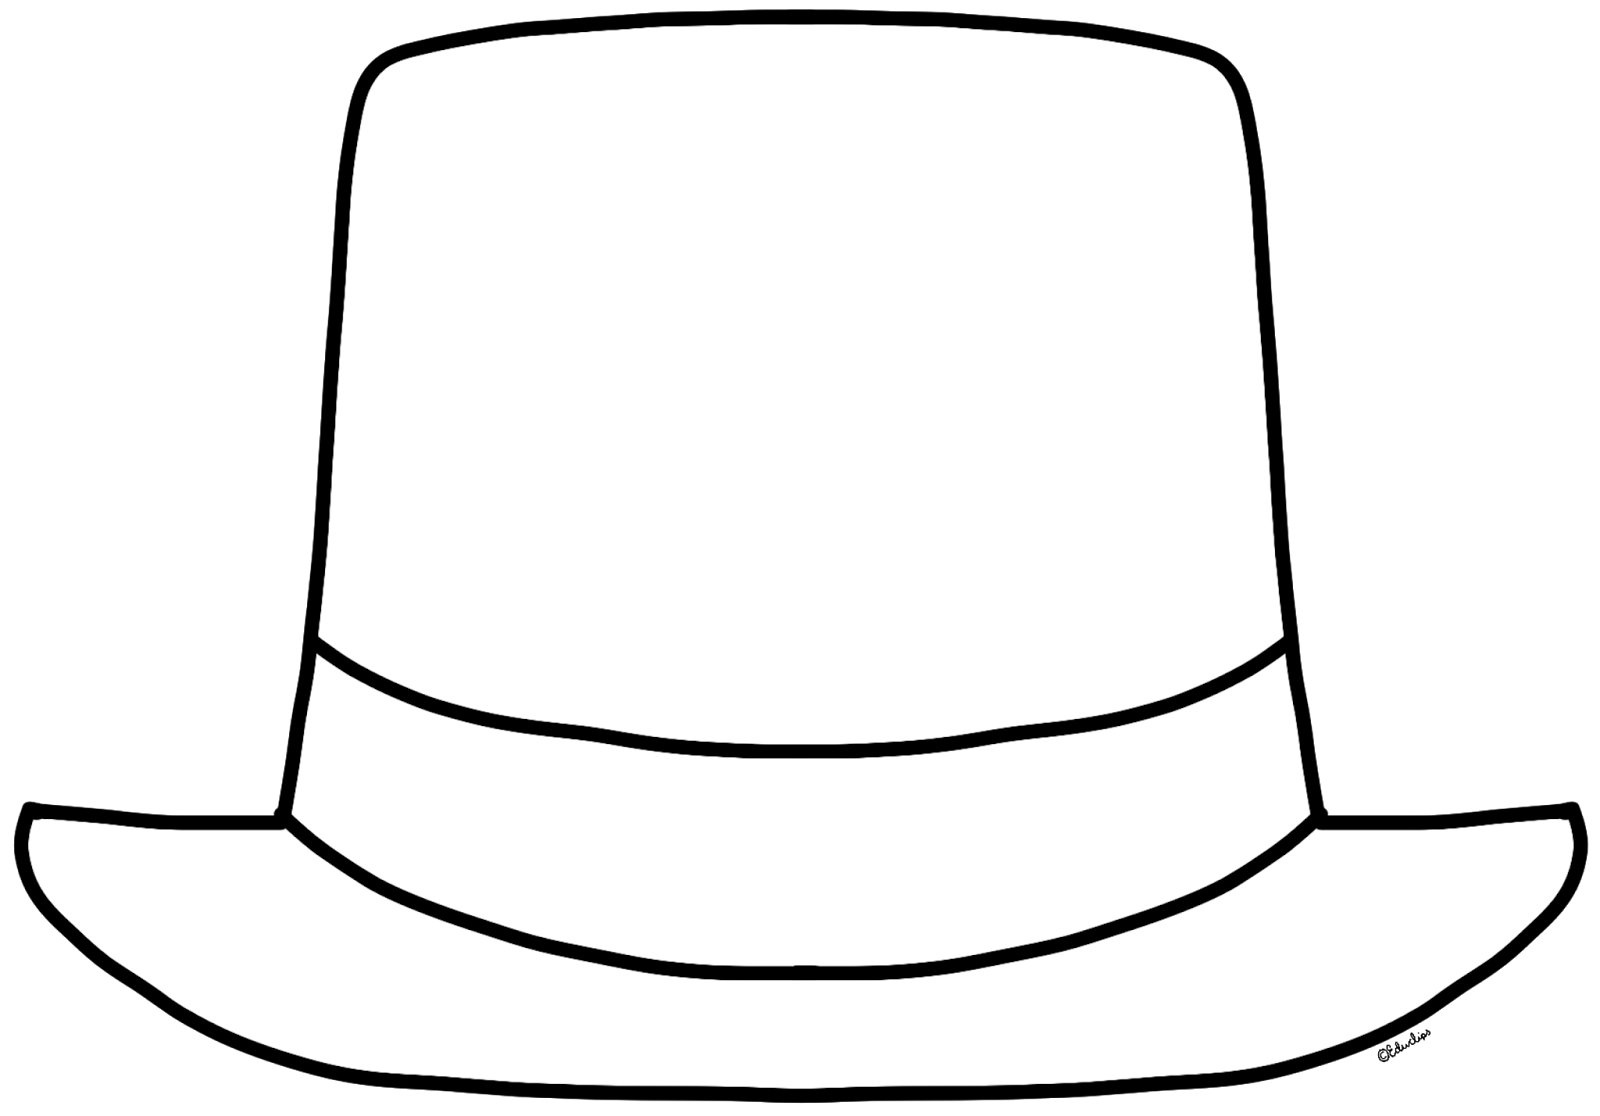 Top Hat Clipart Black And White - ClipArt Best